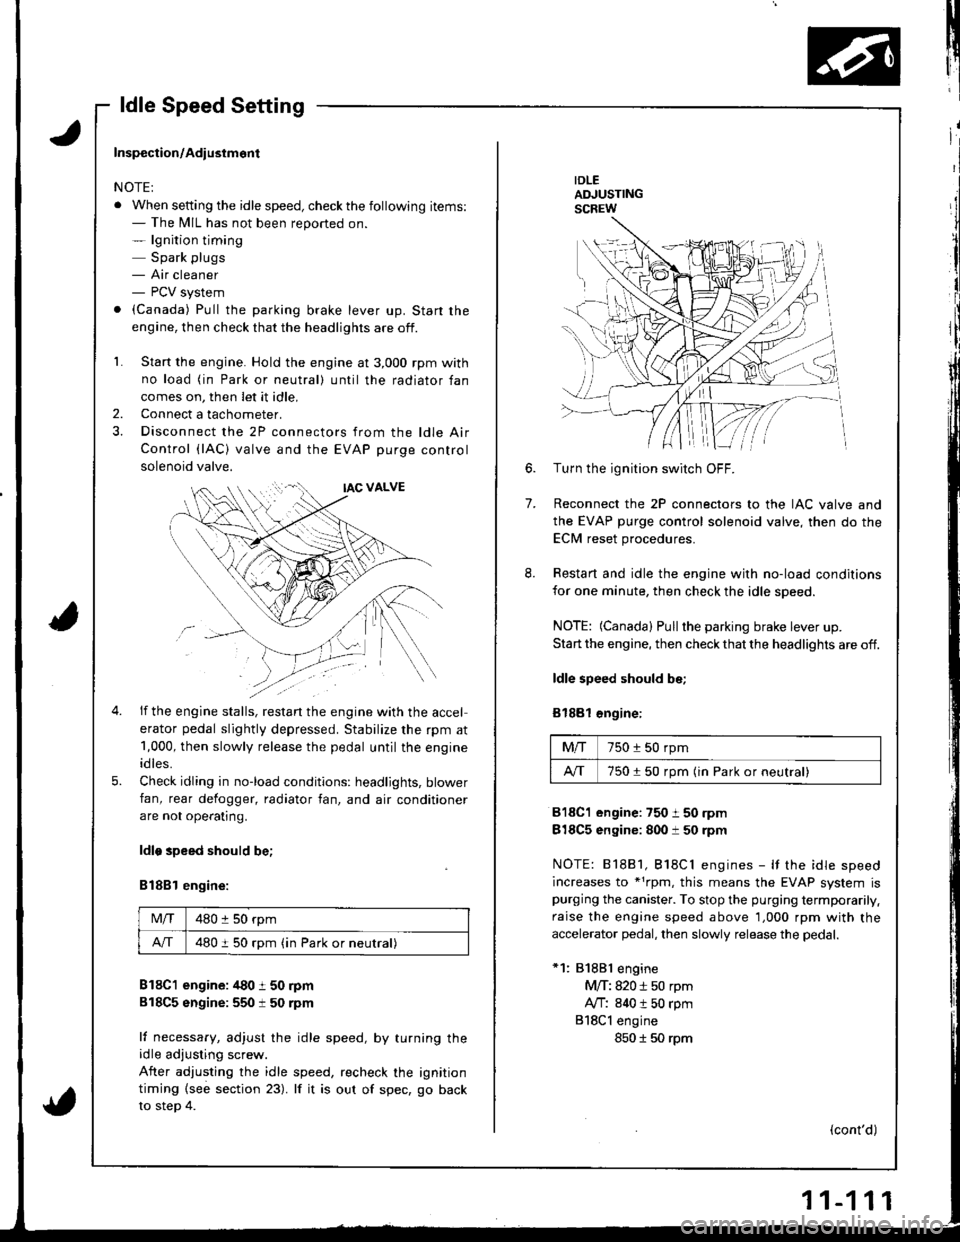 HONDA INTEGRA 1998 4.G Workshop Manual ldle Speed Setting
IDLEADJUSTINGSCREW
7.
6.Turn the ignition switch OFF.
Reconnect the 2P connectors to the IAC valve and
the EVAP purge control solenoid valve, then do the
ECM reset procedures.
Resta